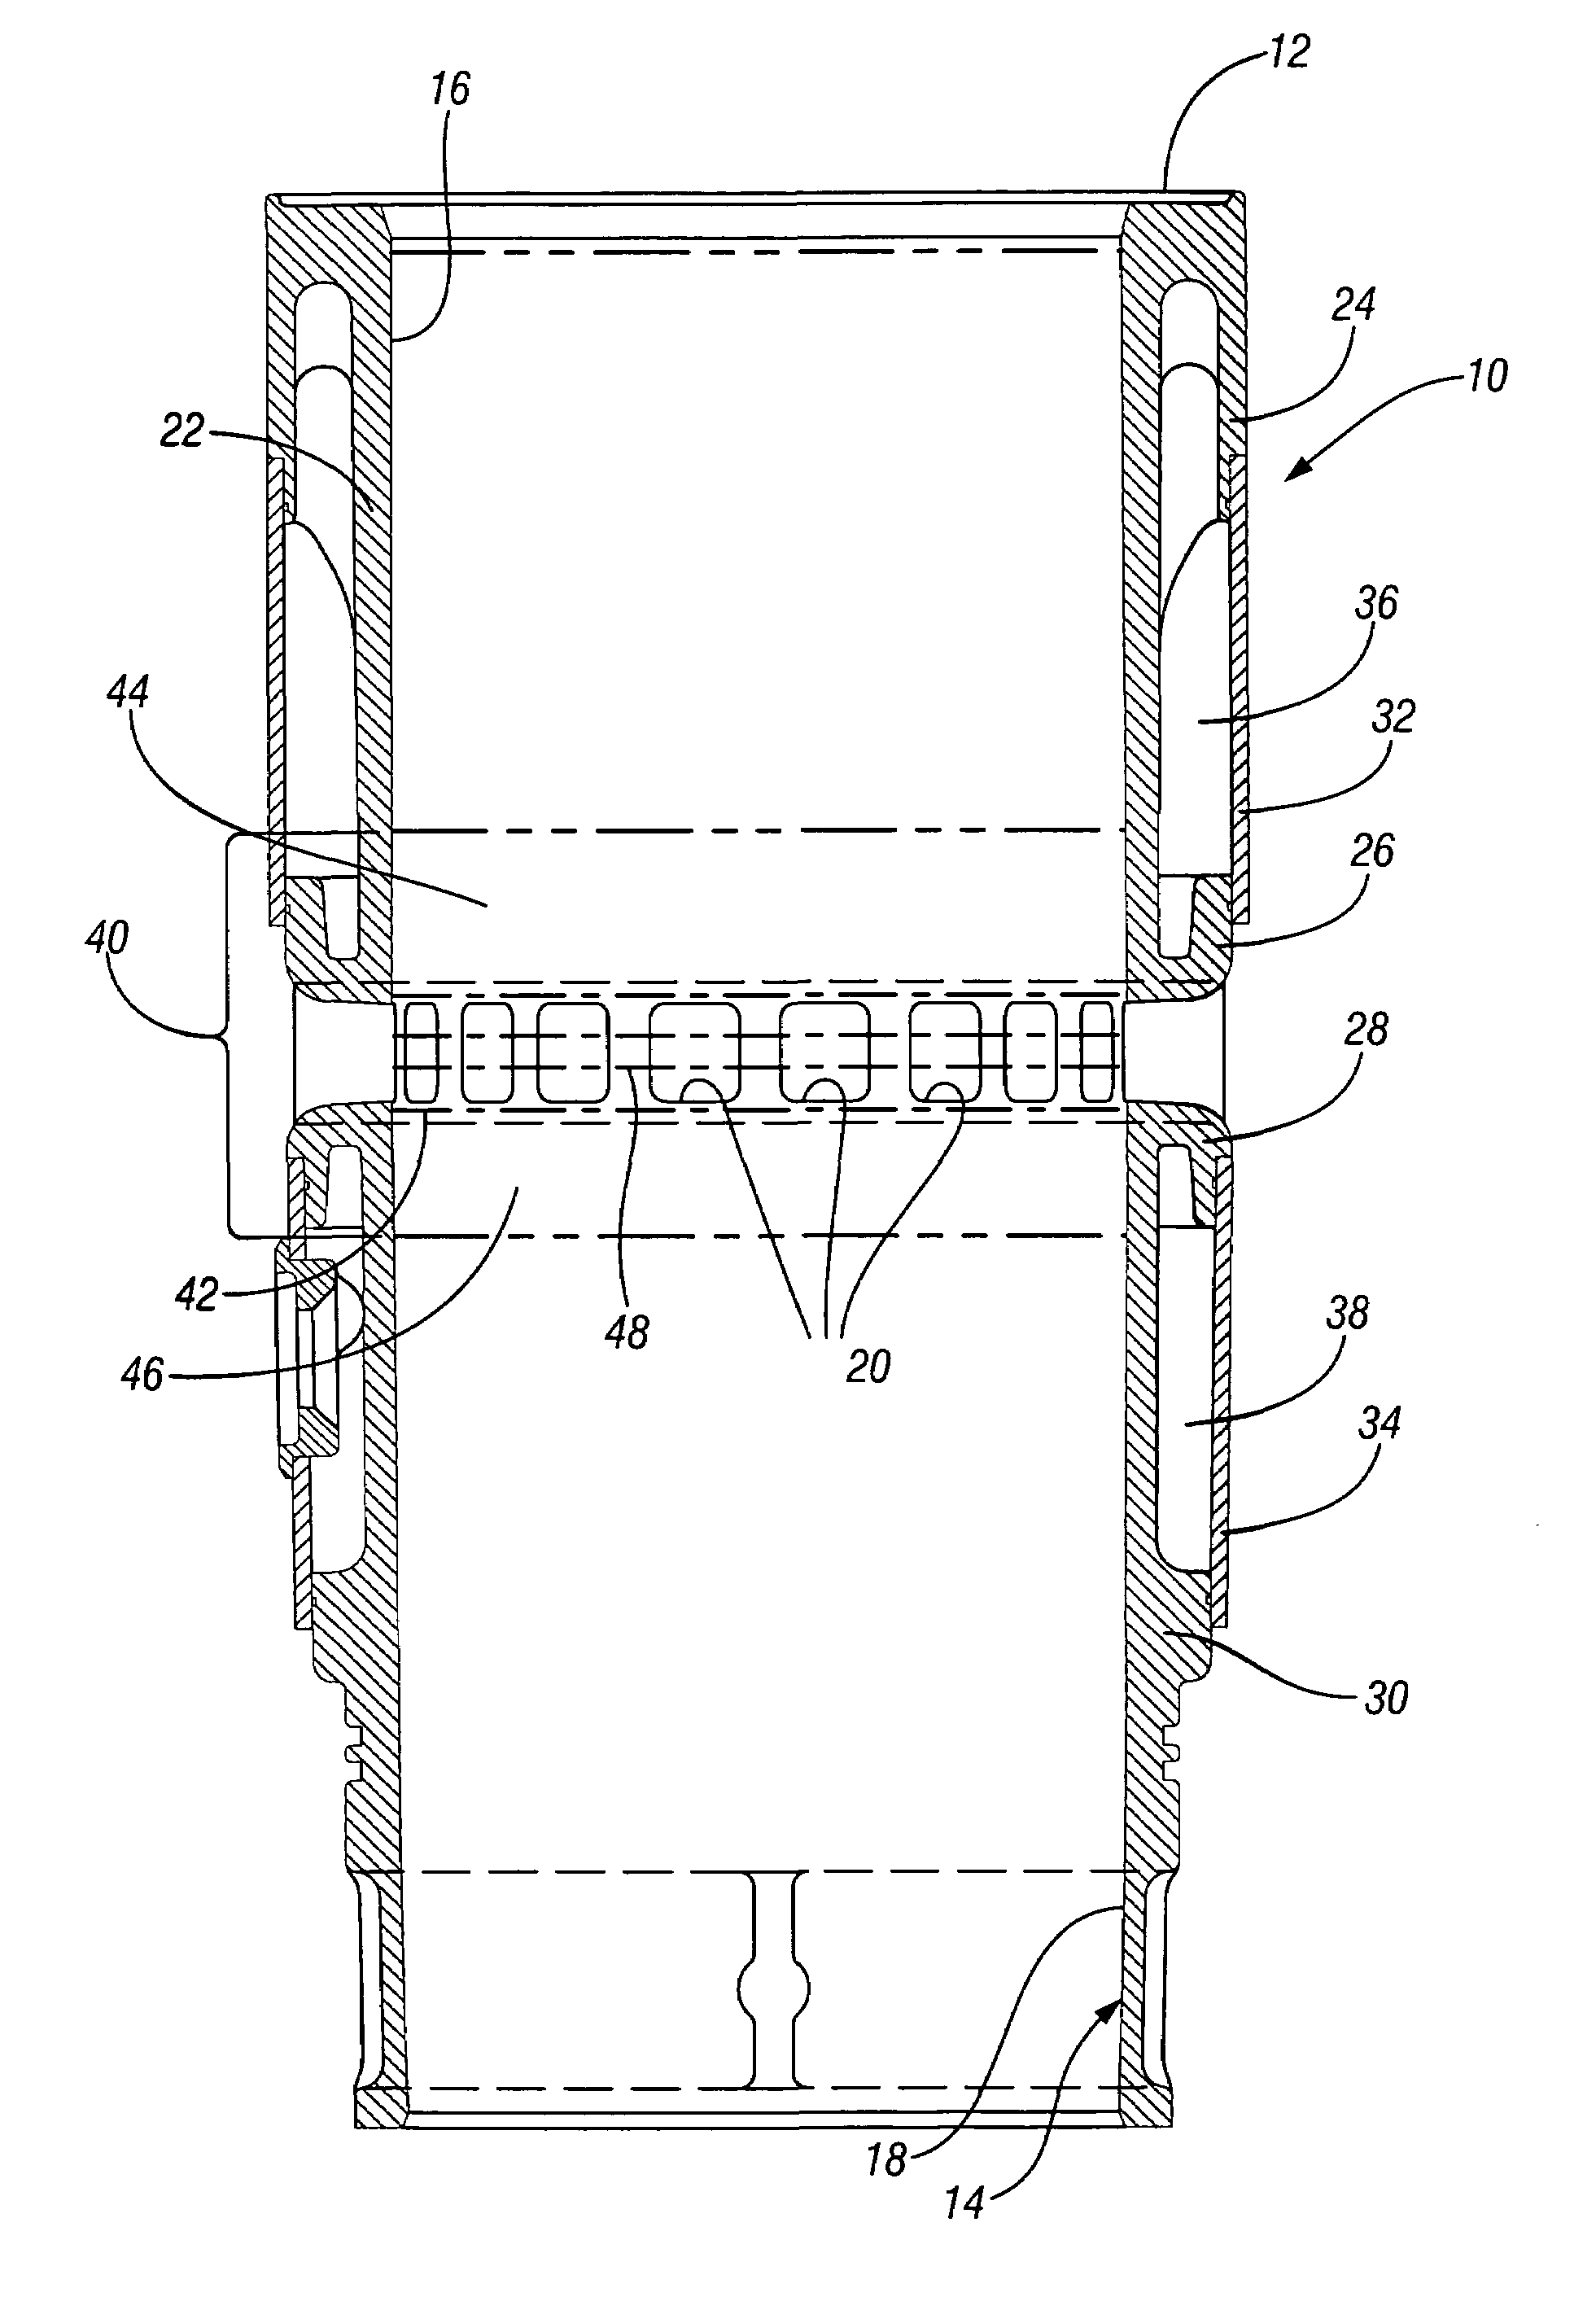 Ported engine cylinder liner with selectively laser-hardened and induction-hardened bore